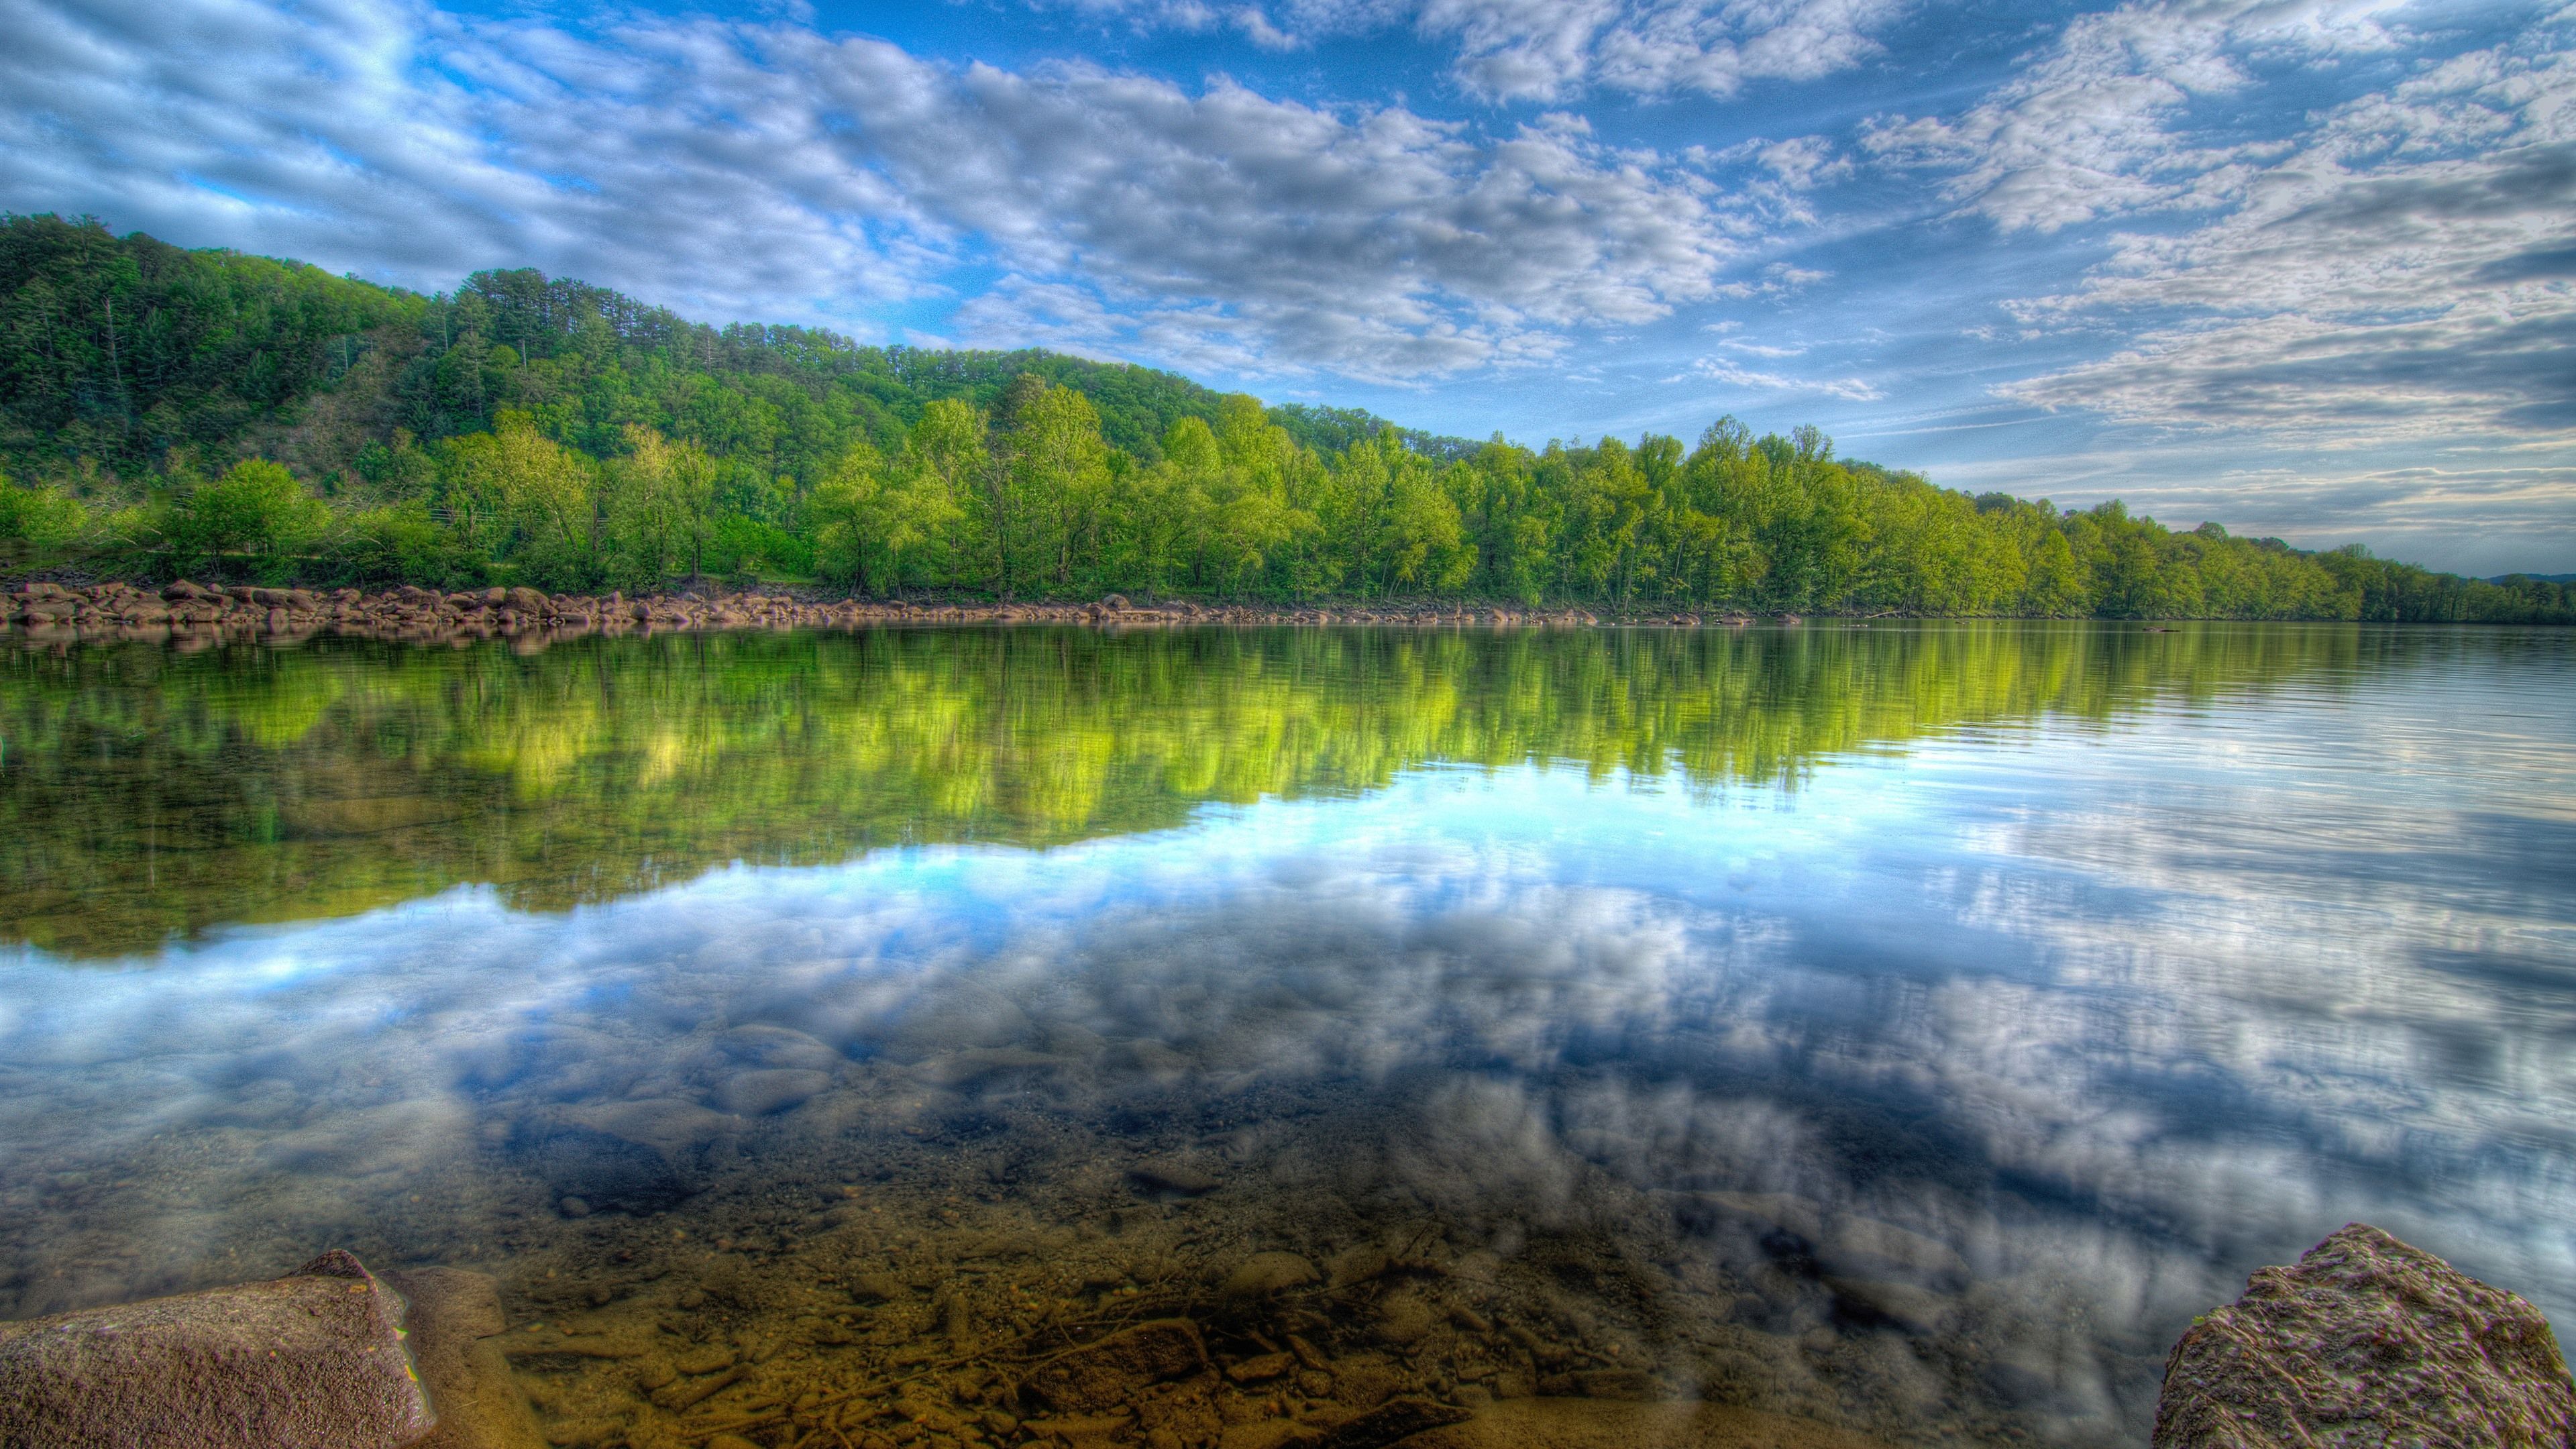 Wallpaper Many trees, forest, lake, water reflection, sky, white clouds 3840x2160 UHD 4K Picture, Image